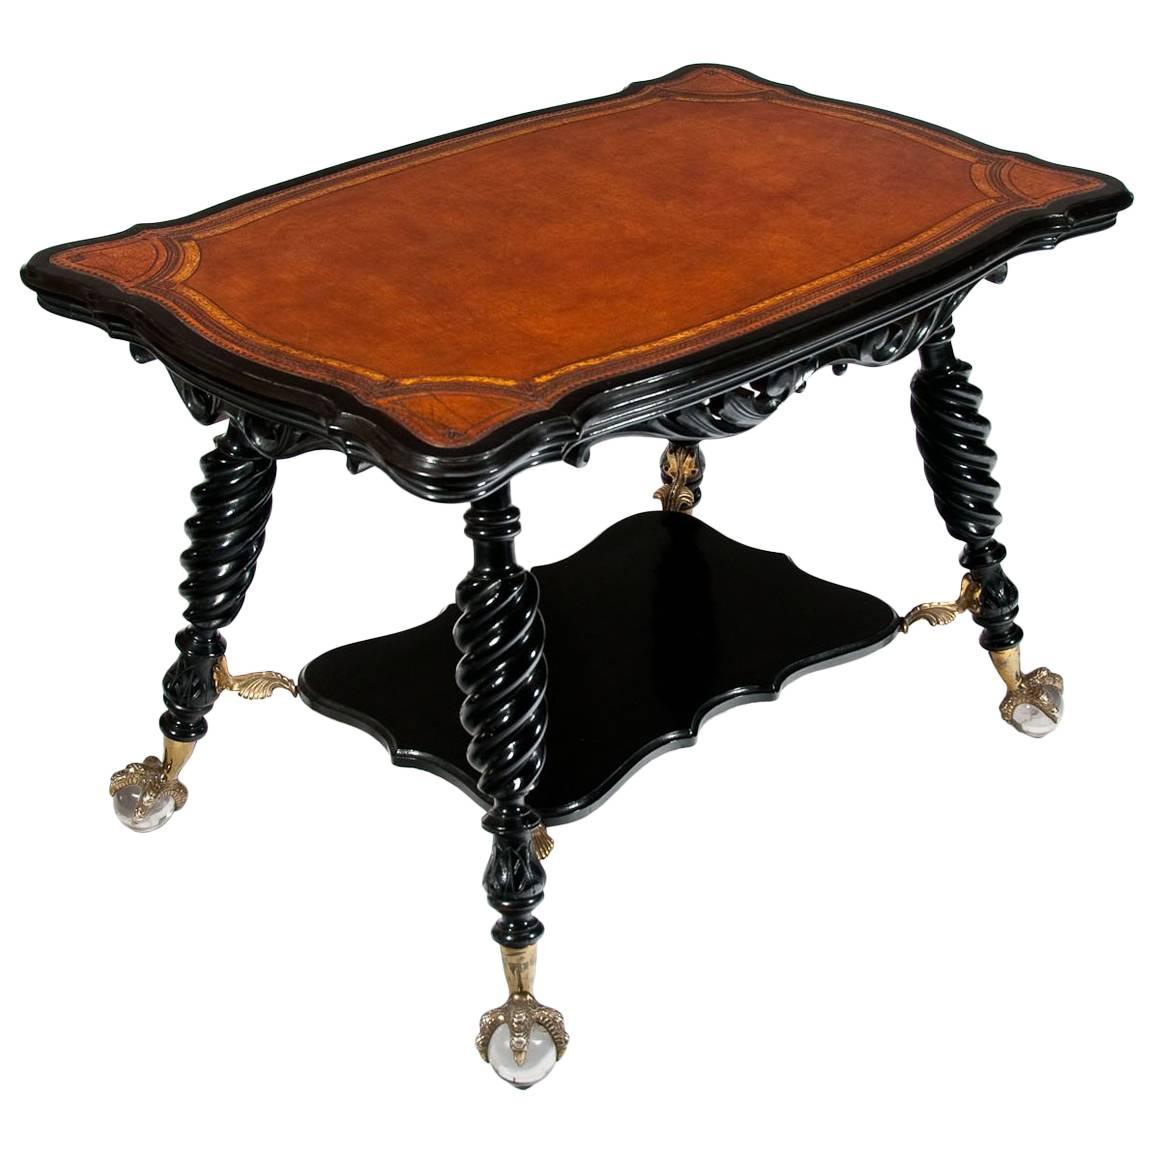 Antique Ebonized and Leathered Centre Table